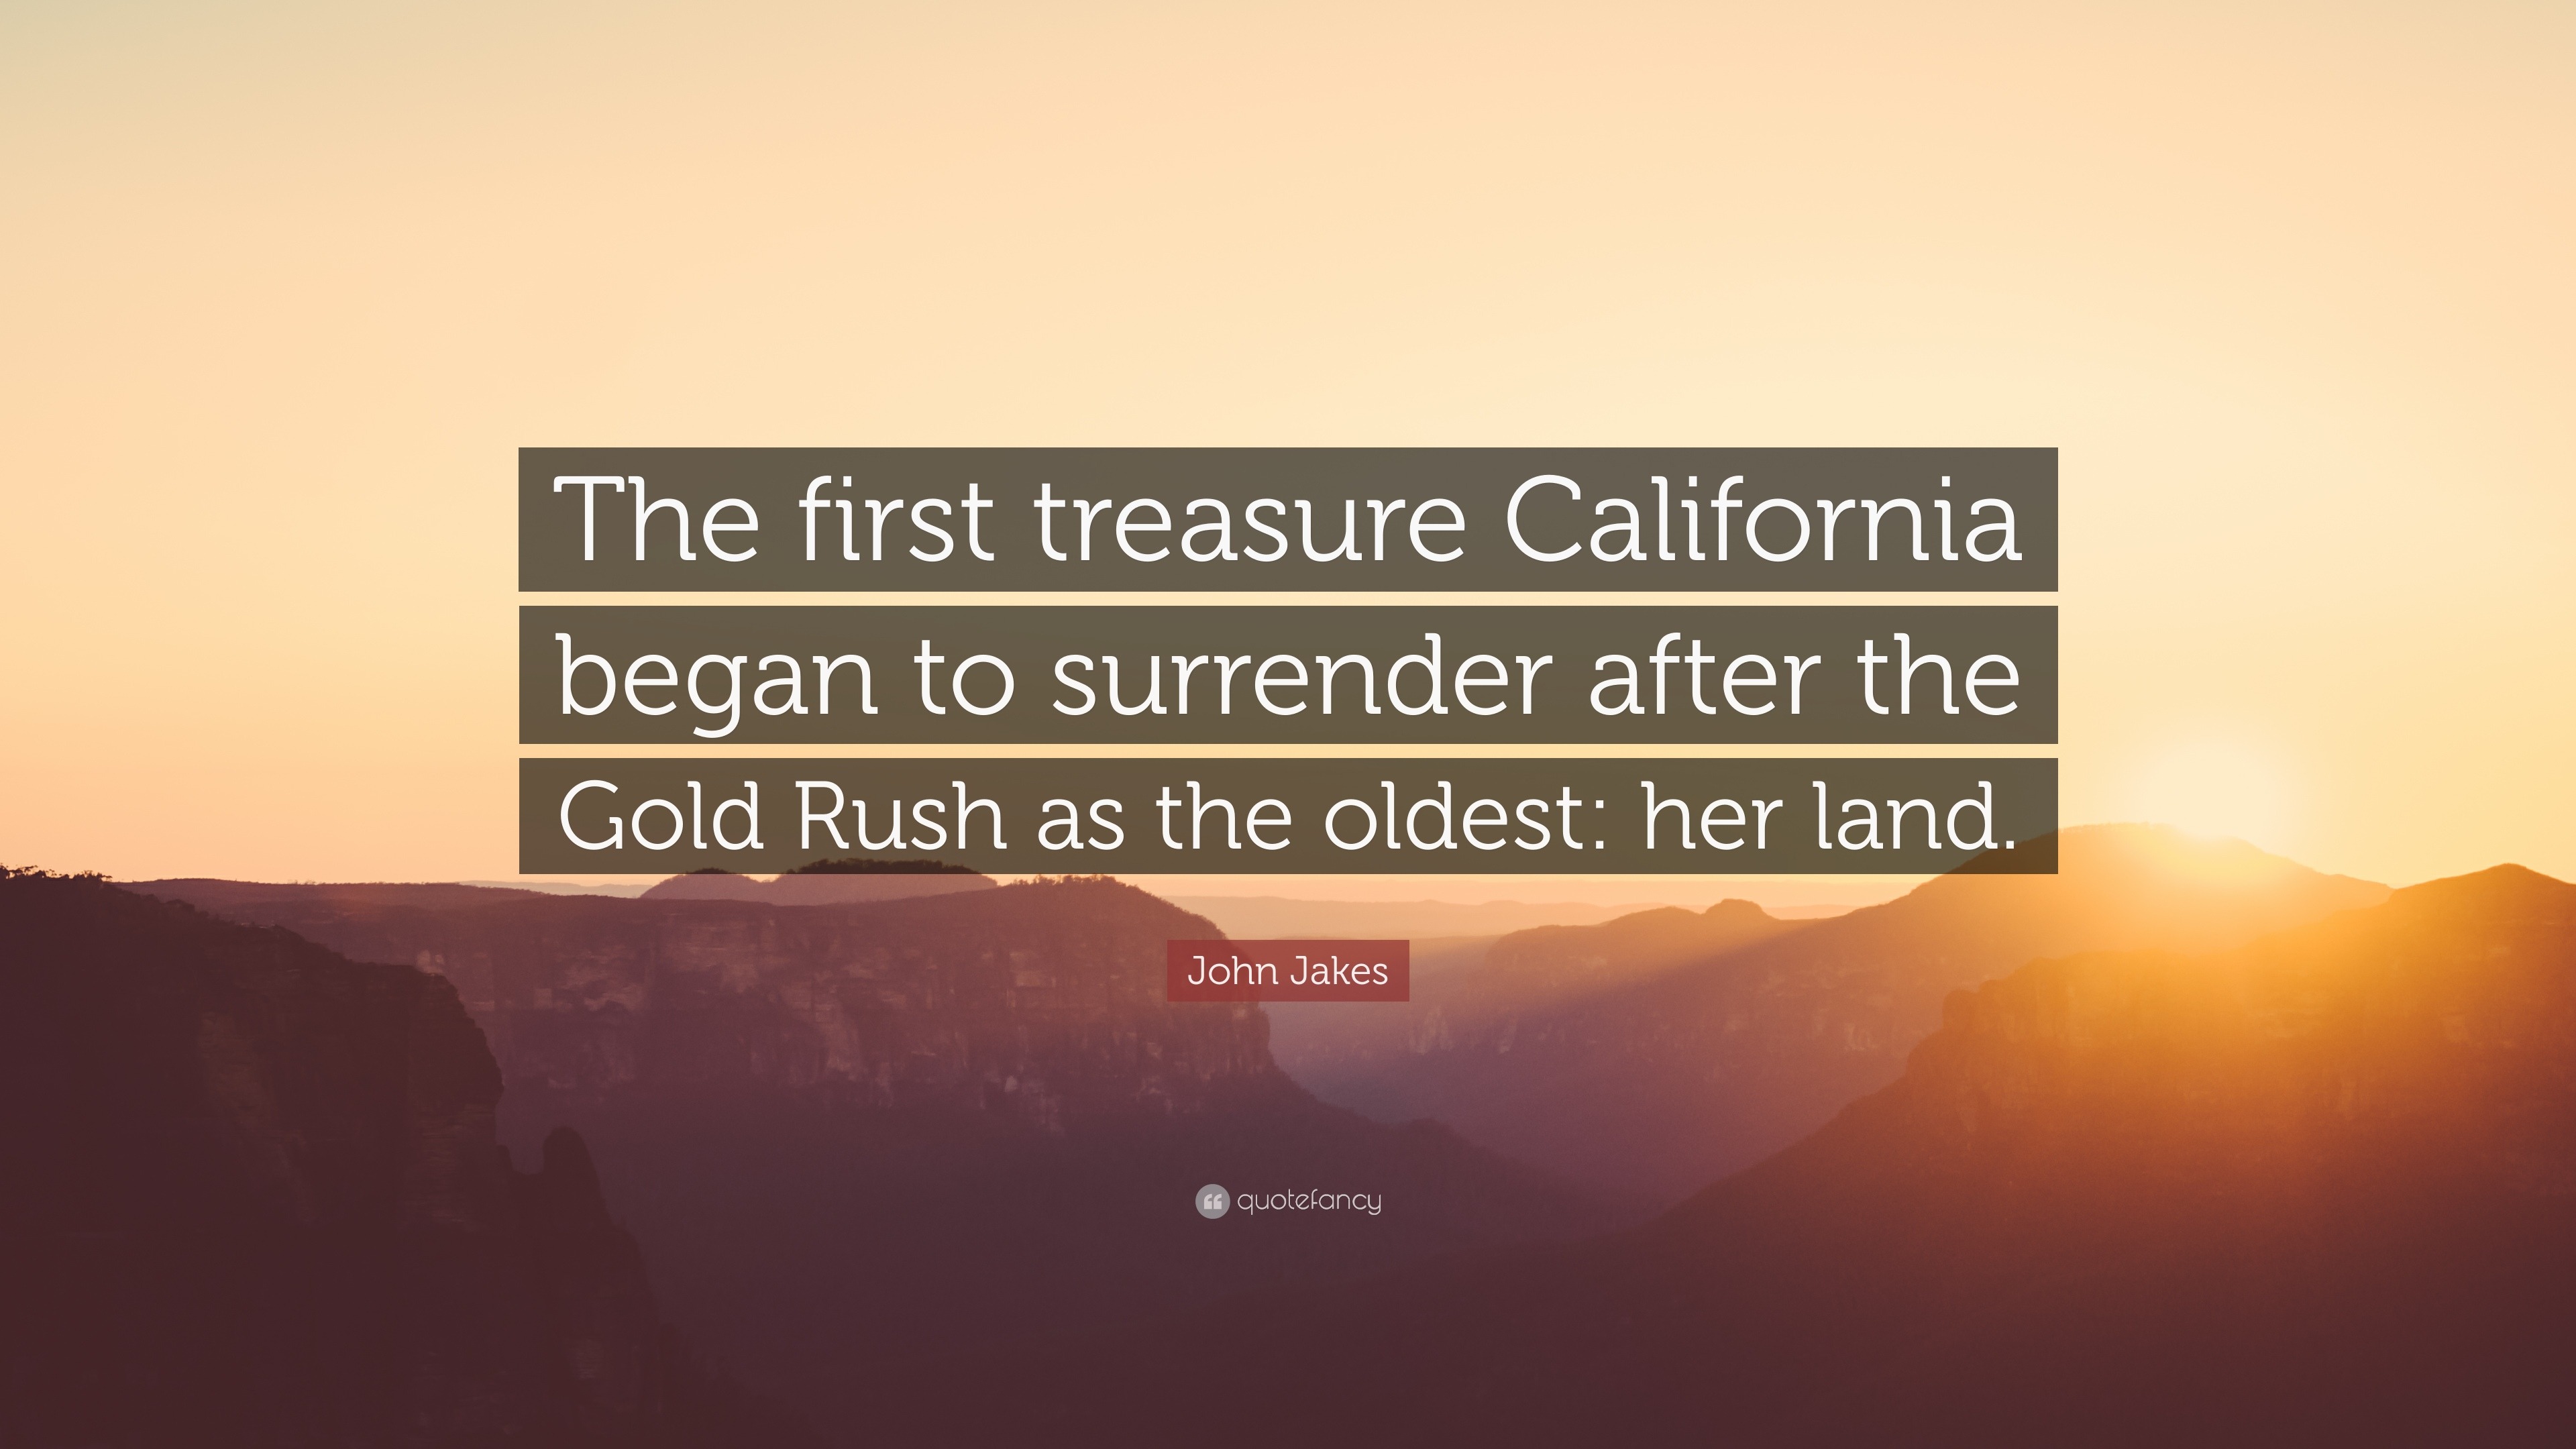 John Jakes Quote: "The first treasure California began to surrender after the Gold Rush as the ...